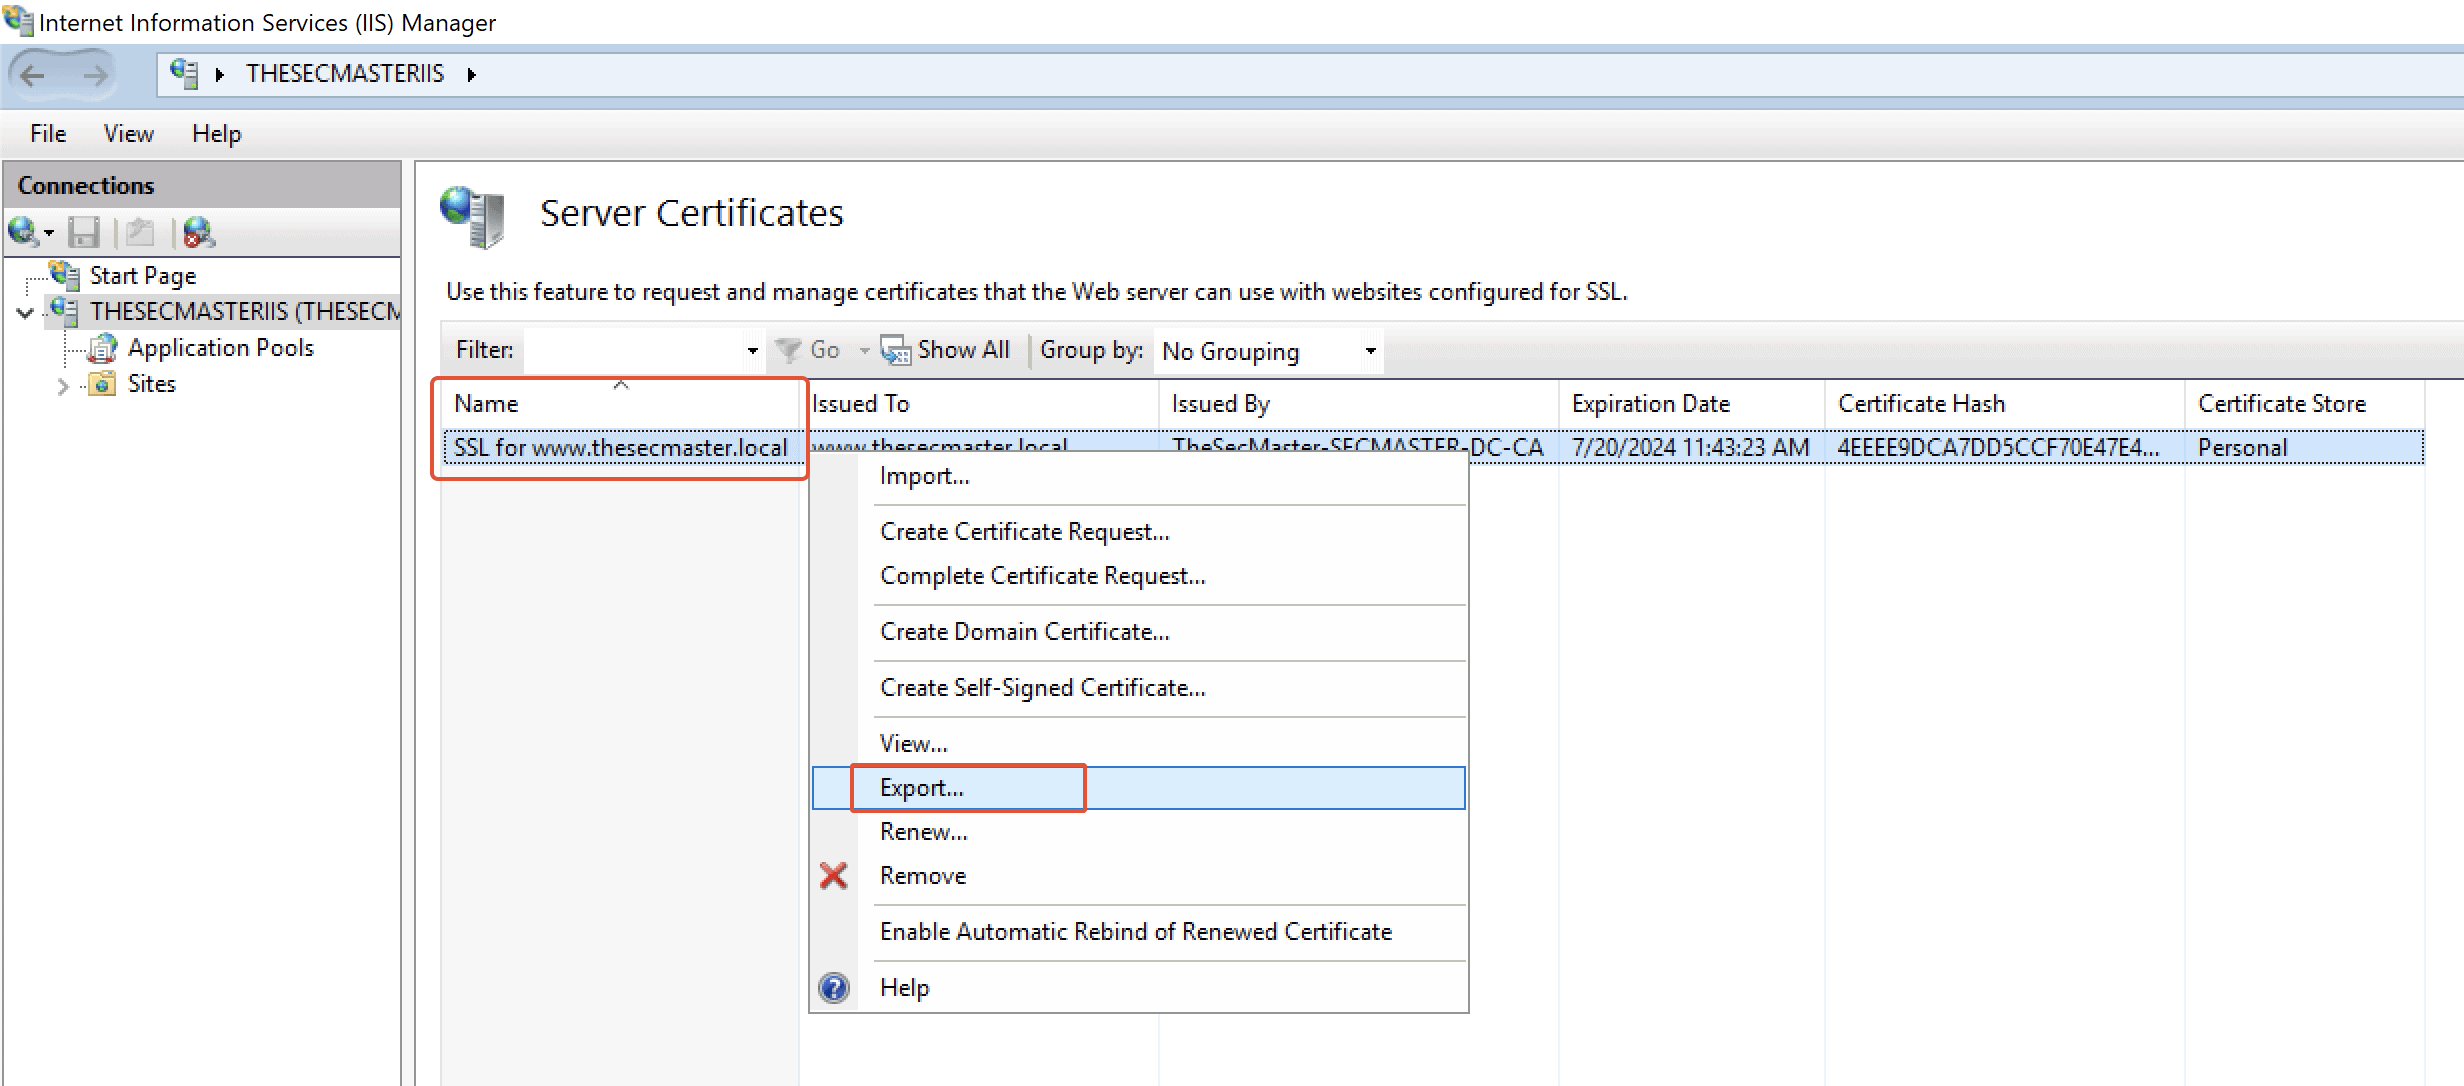 Exporting The Certificate Installed In The Certificate Store